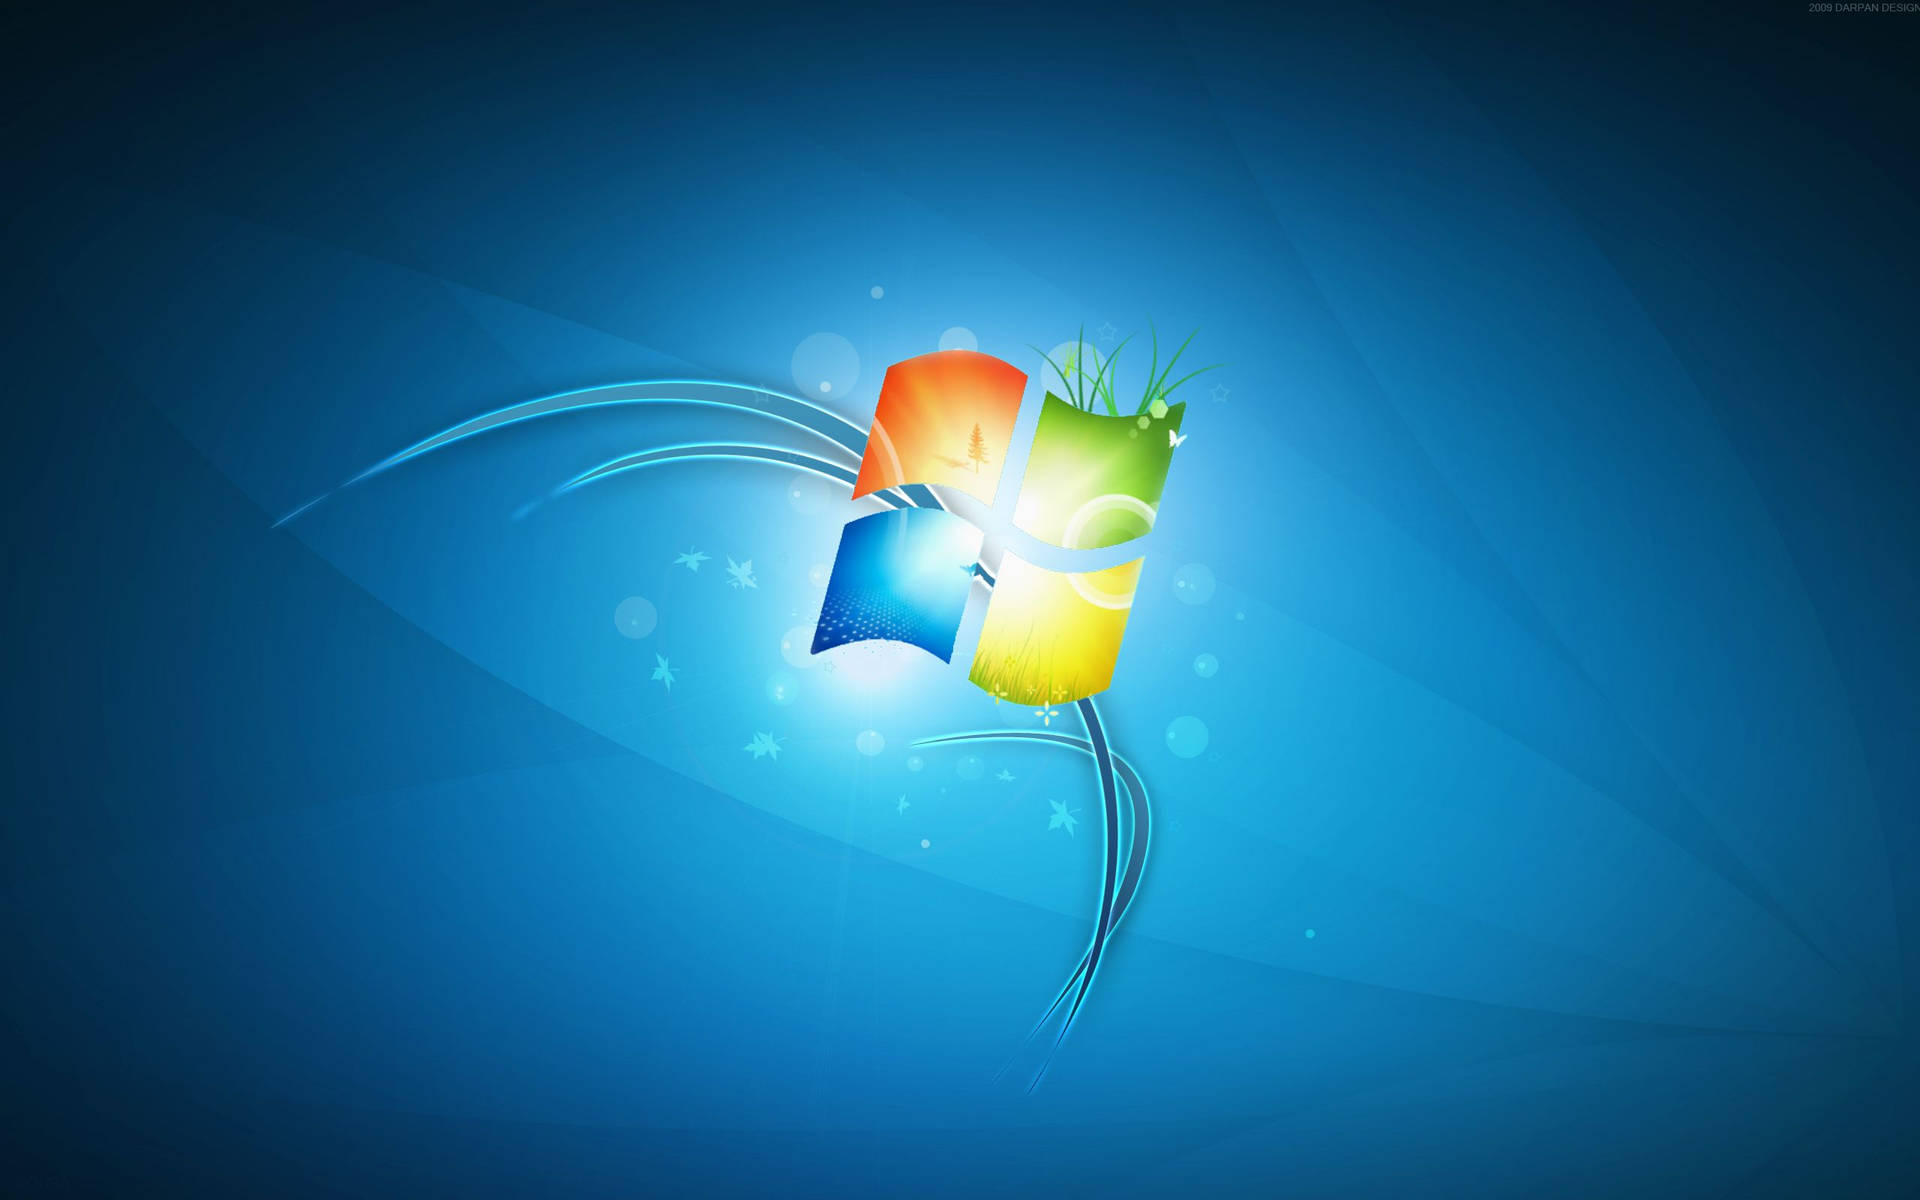 Get the Most Out of Your Windows 7 Experience Wallpaper